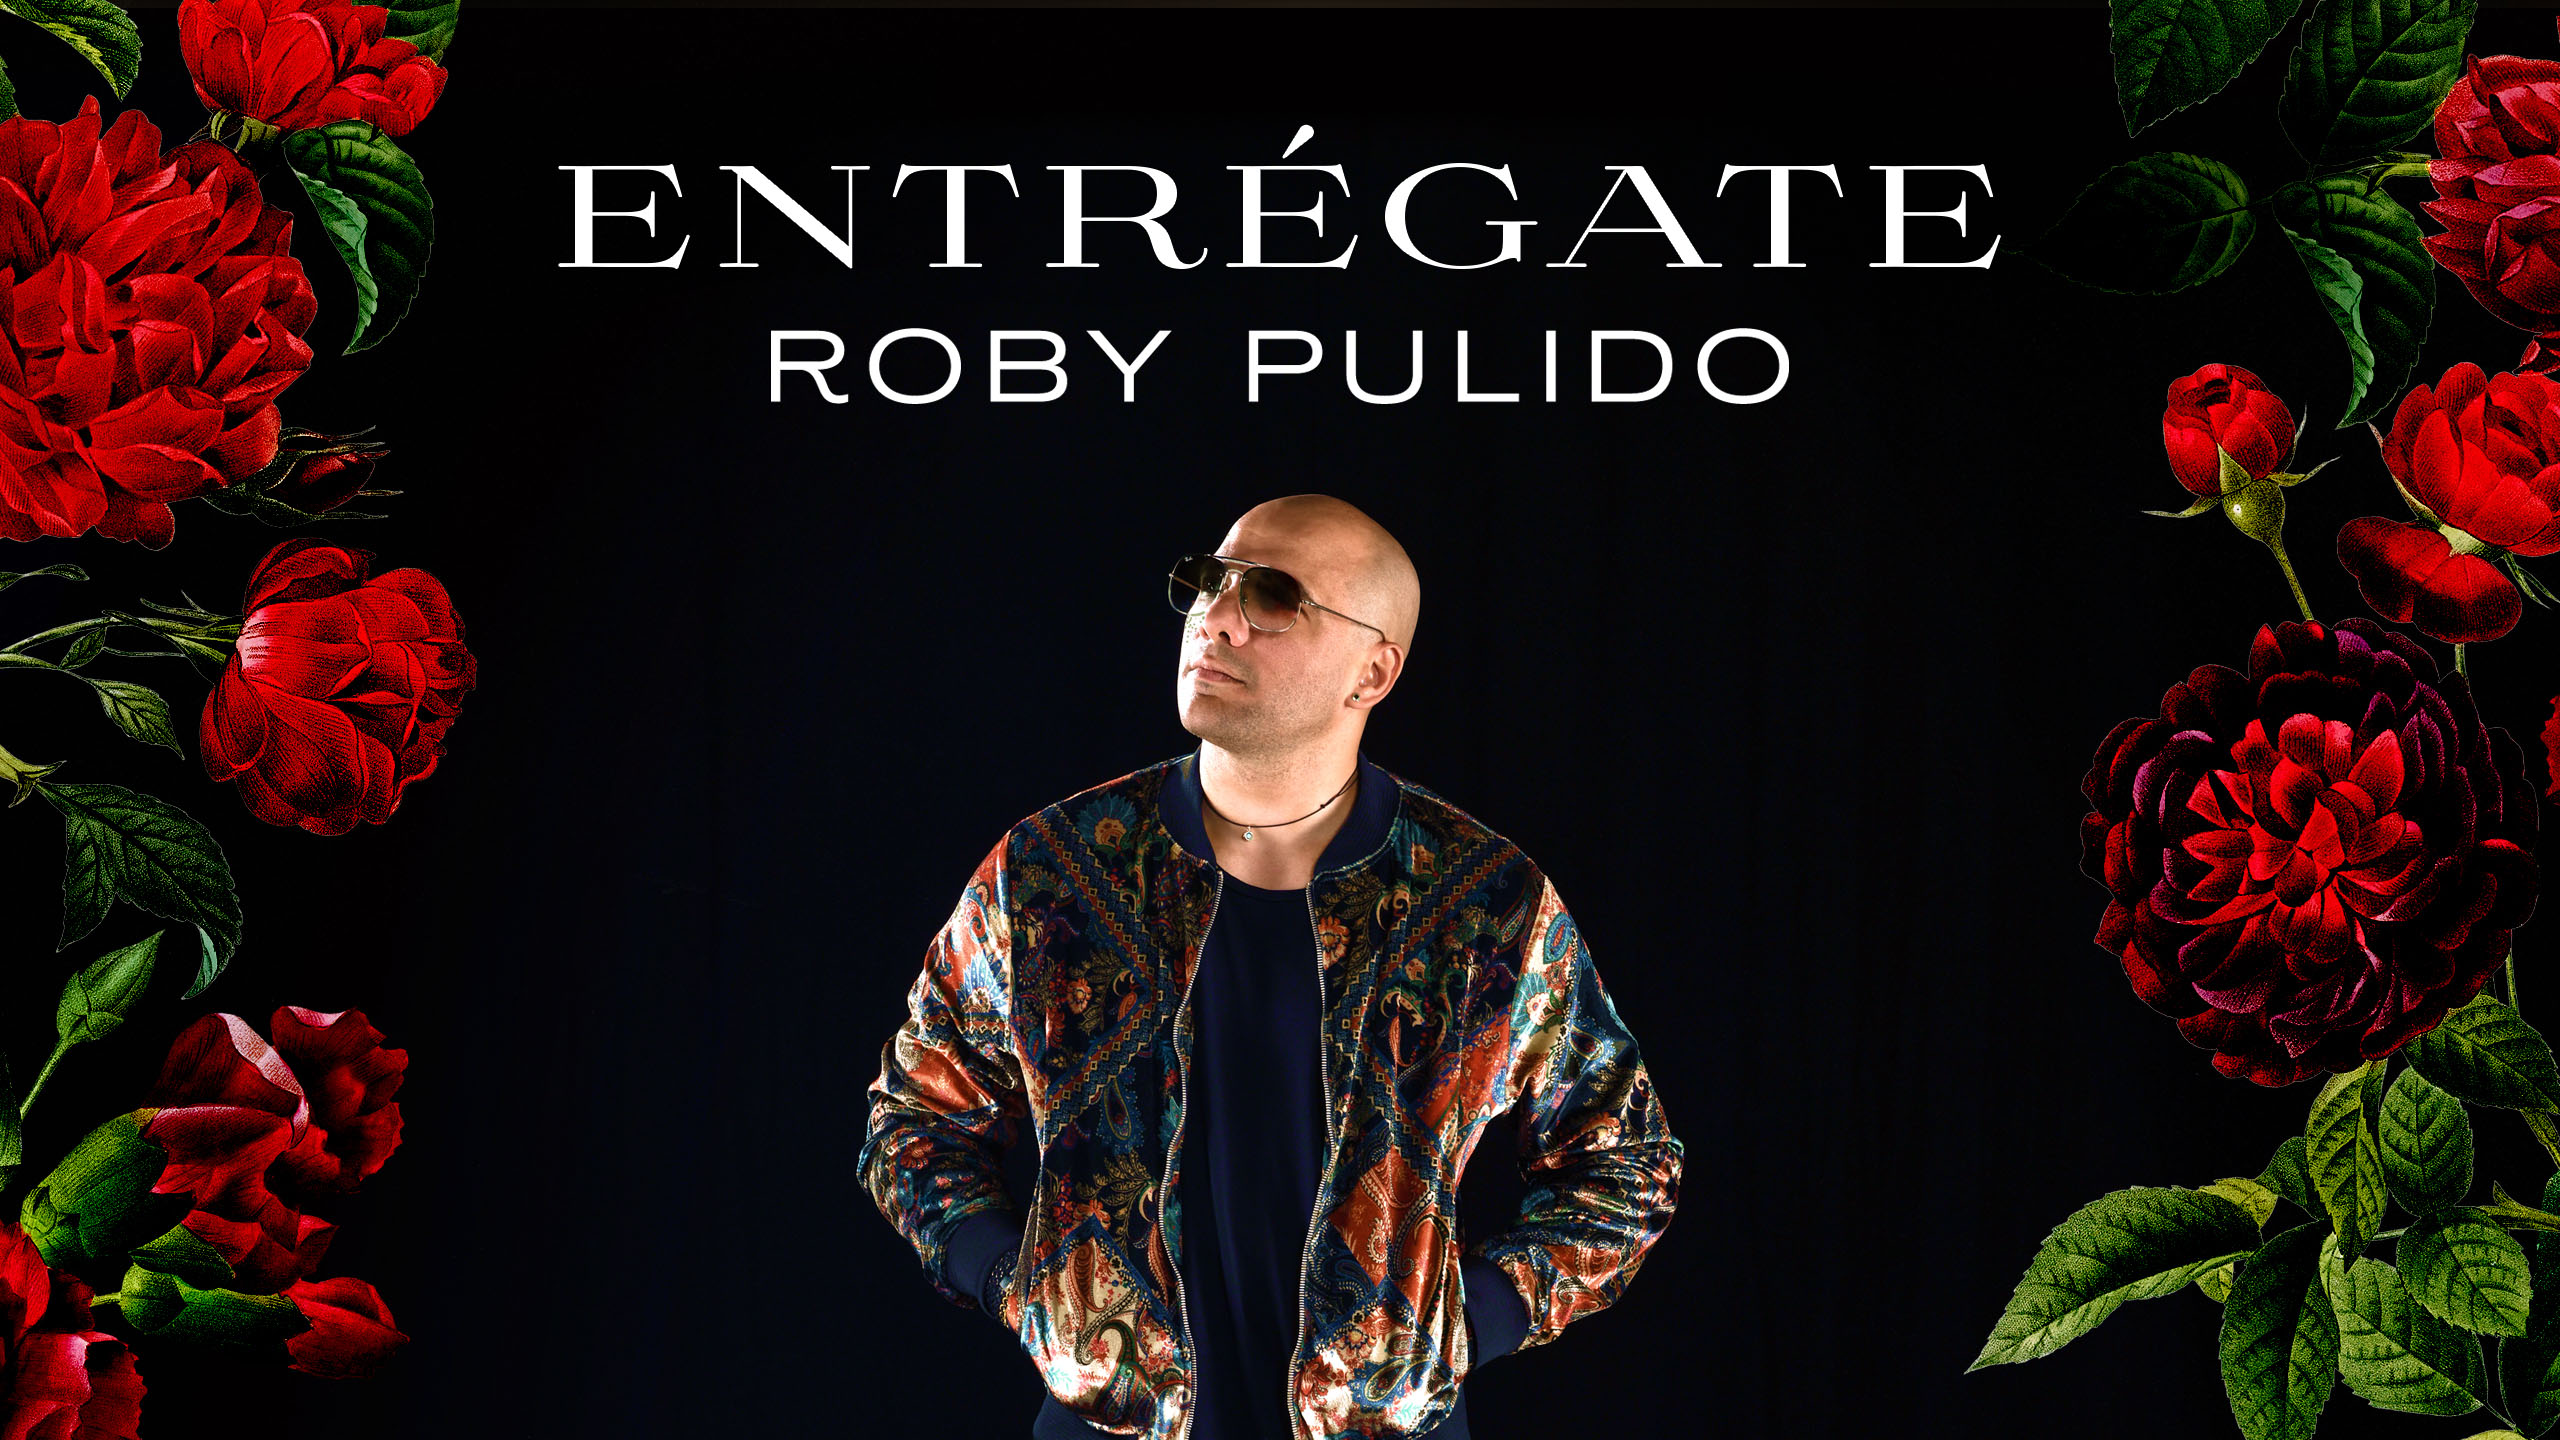 Roby Pulido. New single. Entregate. Design by Annick & Yannick.